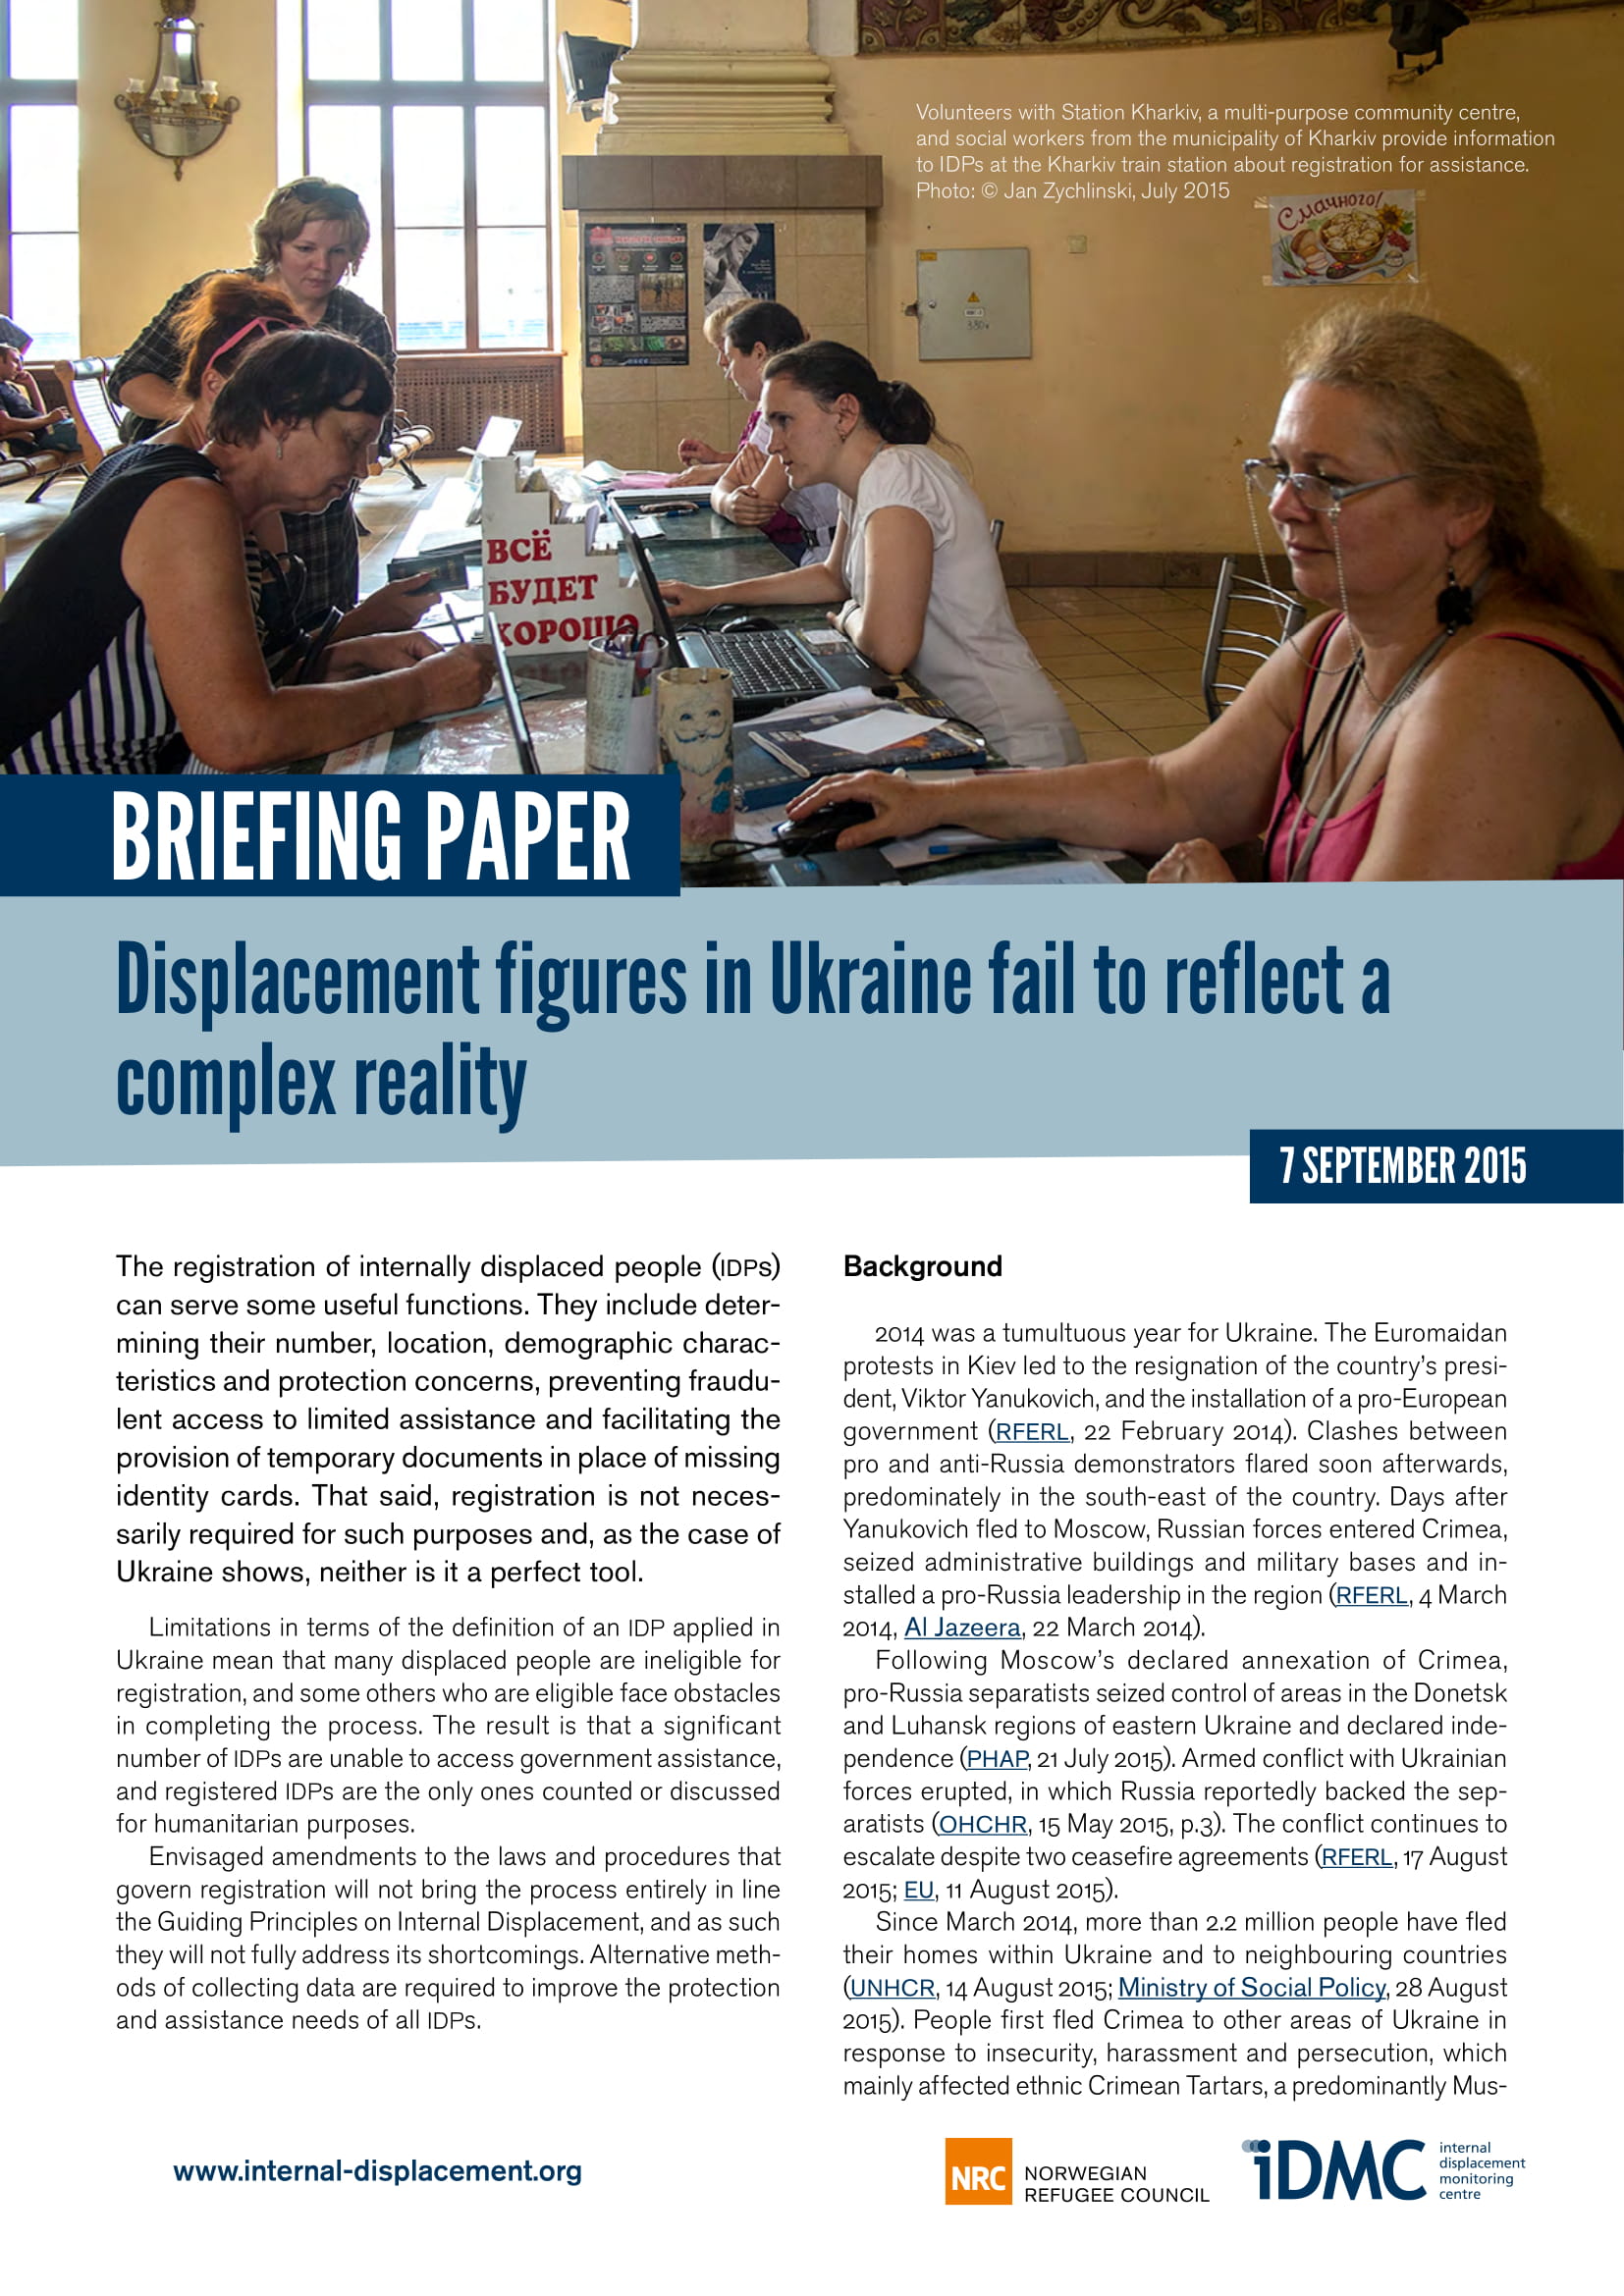 Displacement figures in Ukraine fail to reflect a complex reality